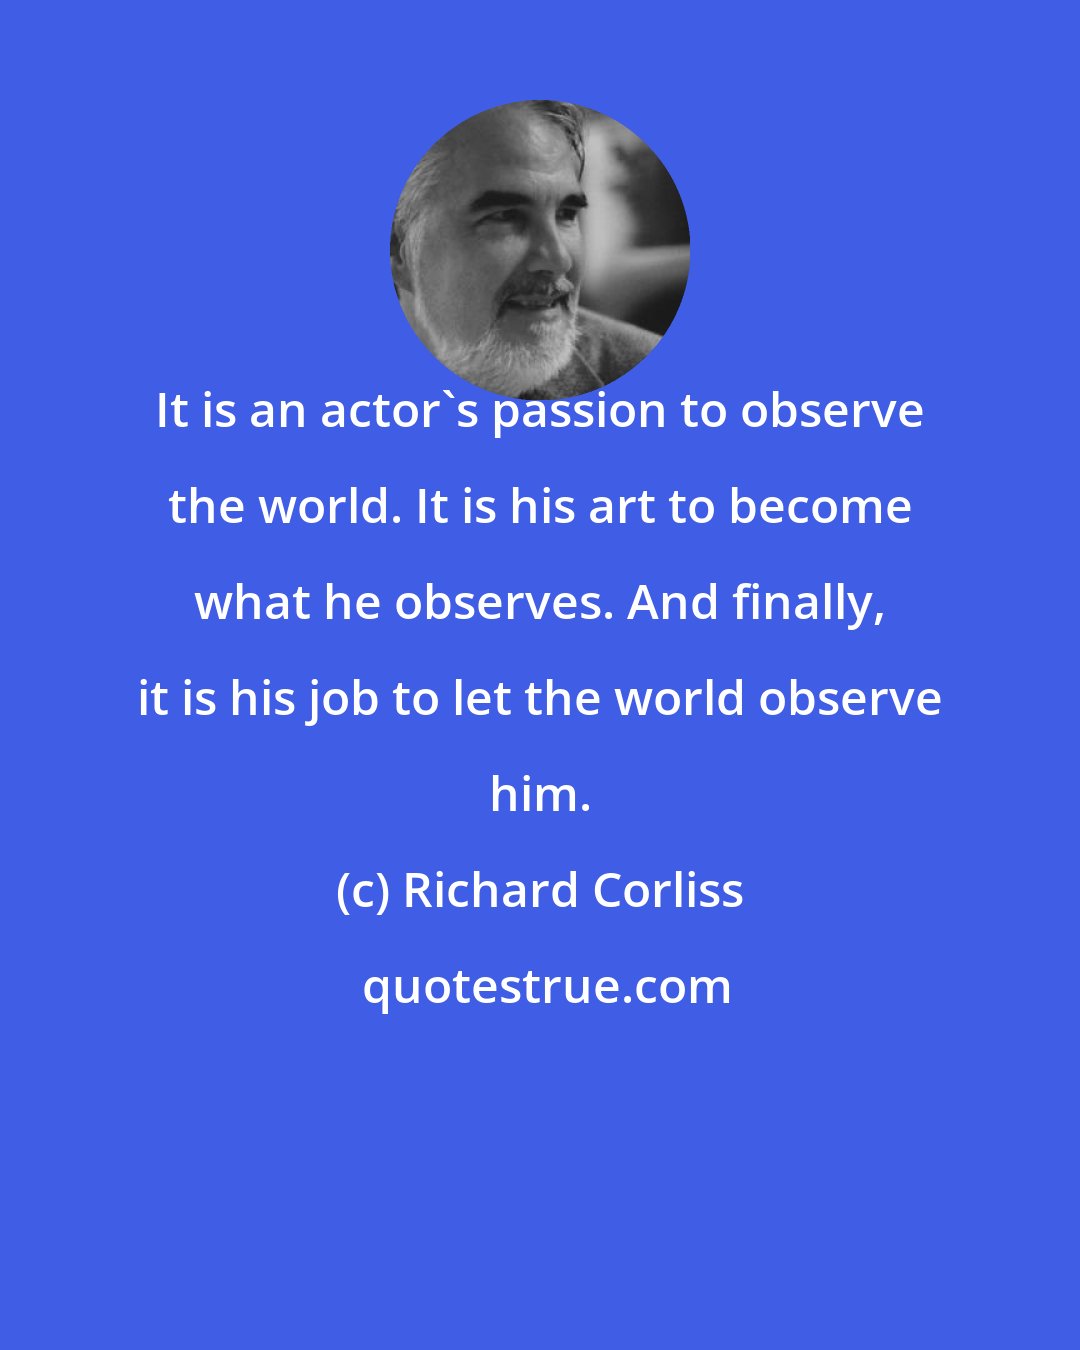 Richard Corliss: It is an actor's passion to observe the world. It is his art to become what he observes. And finally, it is his job to let the world observe him.